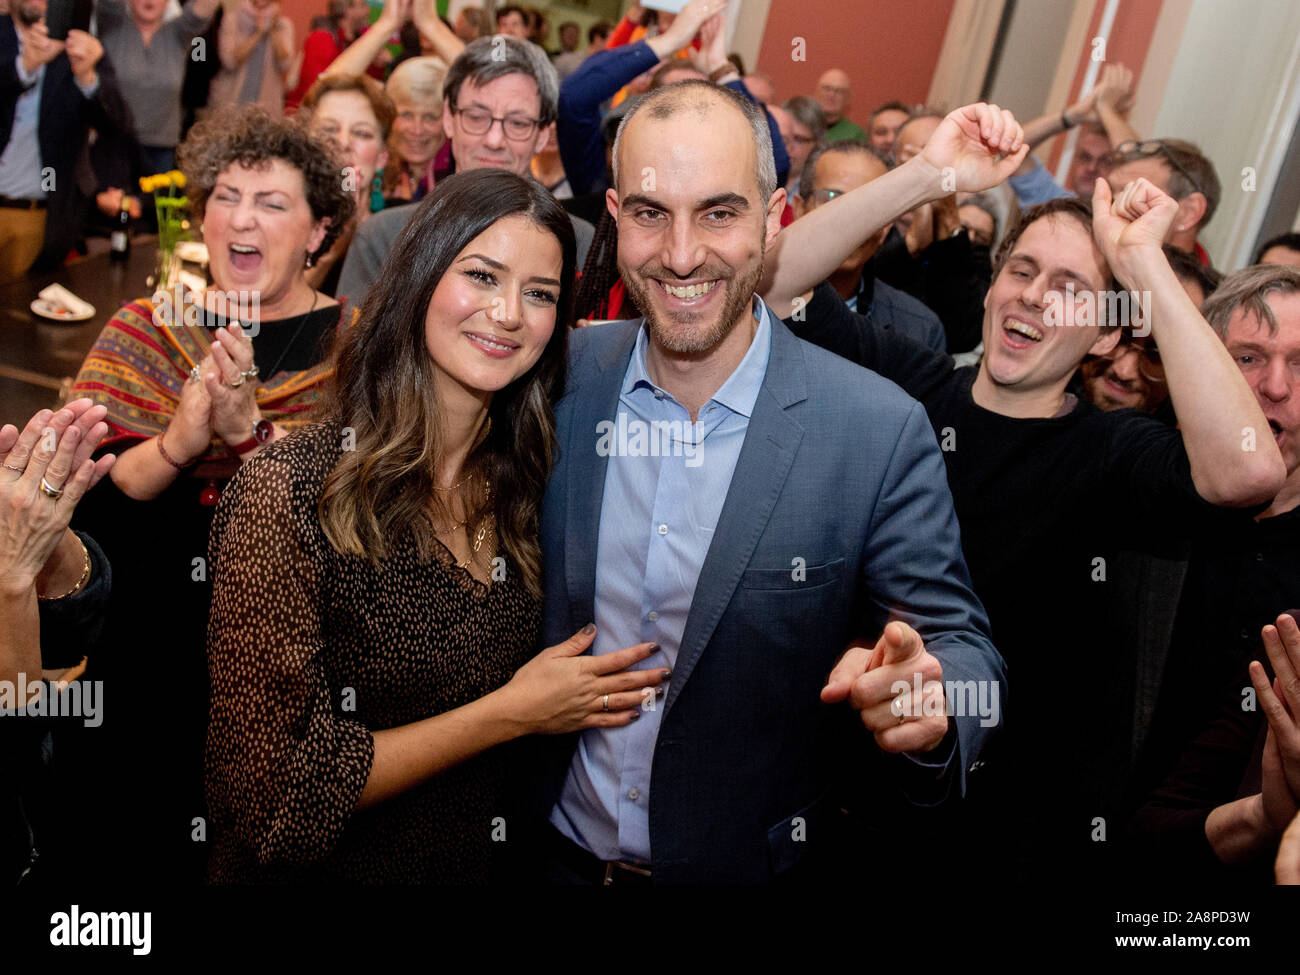 Hanover, Germany. 10th Nov, 2019. Belit Onay (Bündnis 90/Die Grünen), top candidate in the mayoral election, is pleased with his wife Derya (l) and his supporters after the announcement of the election results. Since none of the ten candidates received more than 50 percent of the votes in the first ballot on 27 October 2019, a run-off ballot was held. Credit: Hauke-Christian Dittrich/dpa/Alamy Live News Stock Photo